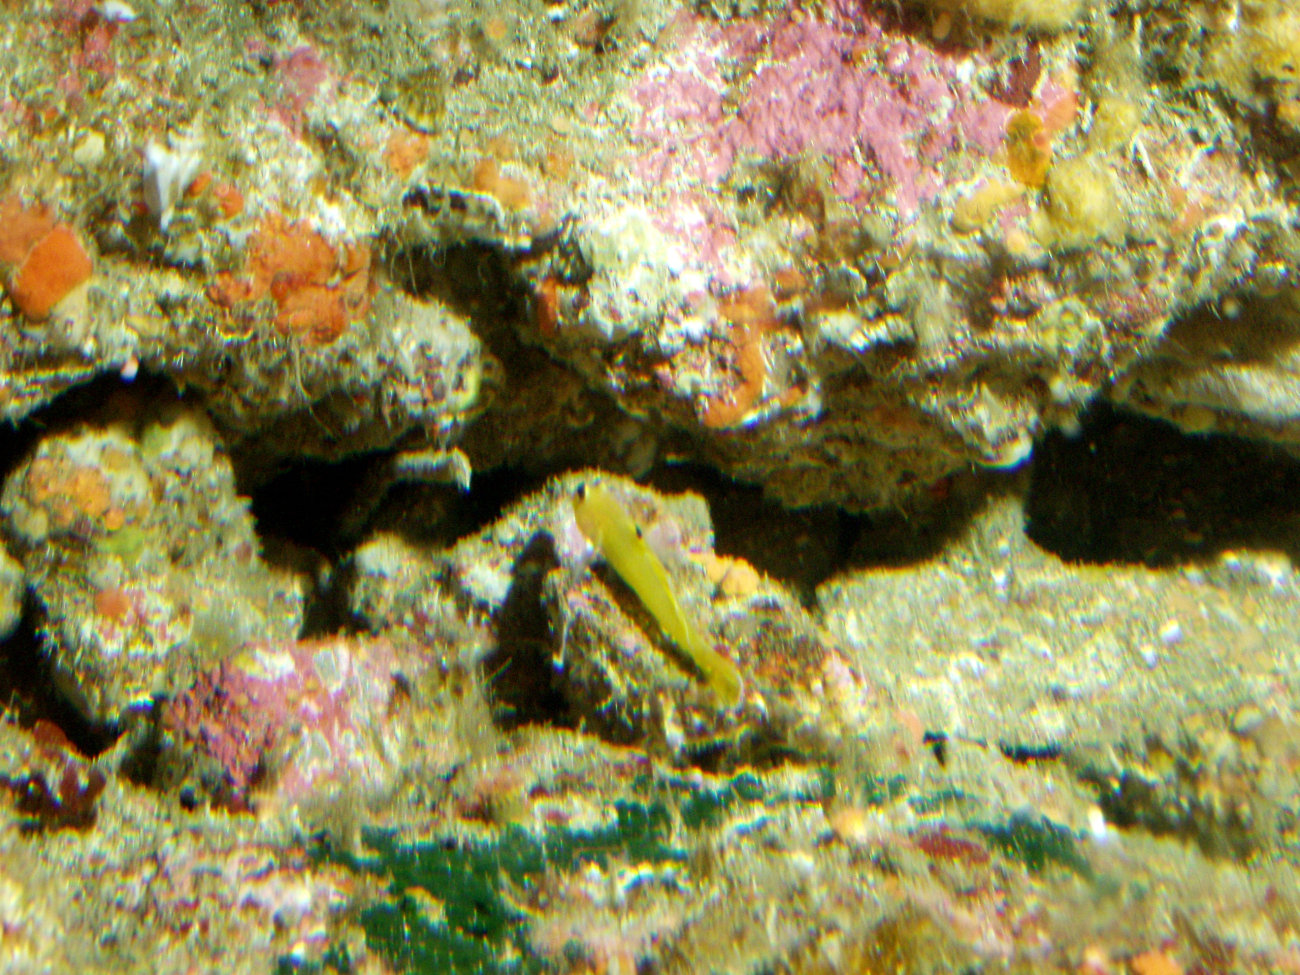 Blackeyed Goby (Coryphopterus nicholsii) on rocky outcroppingat 65 meters depth